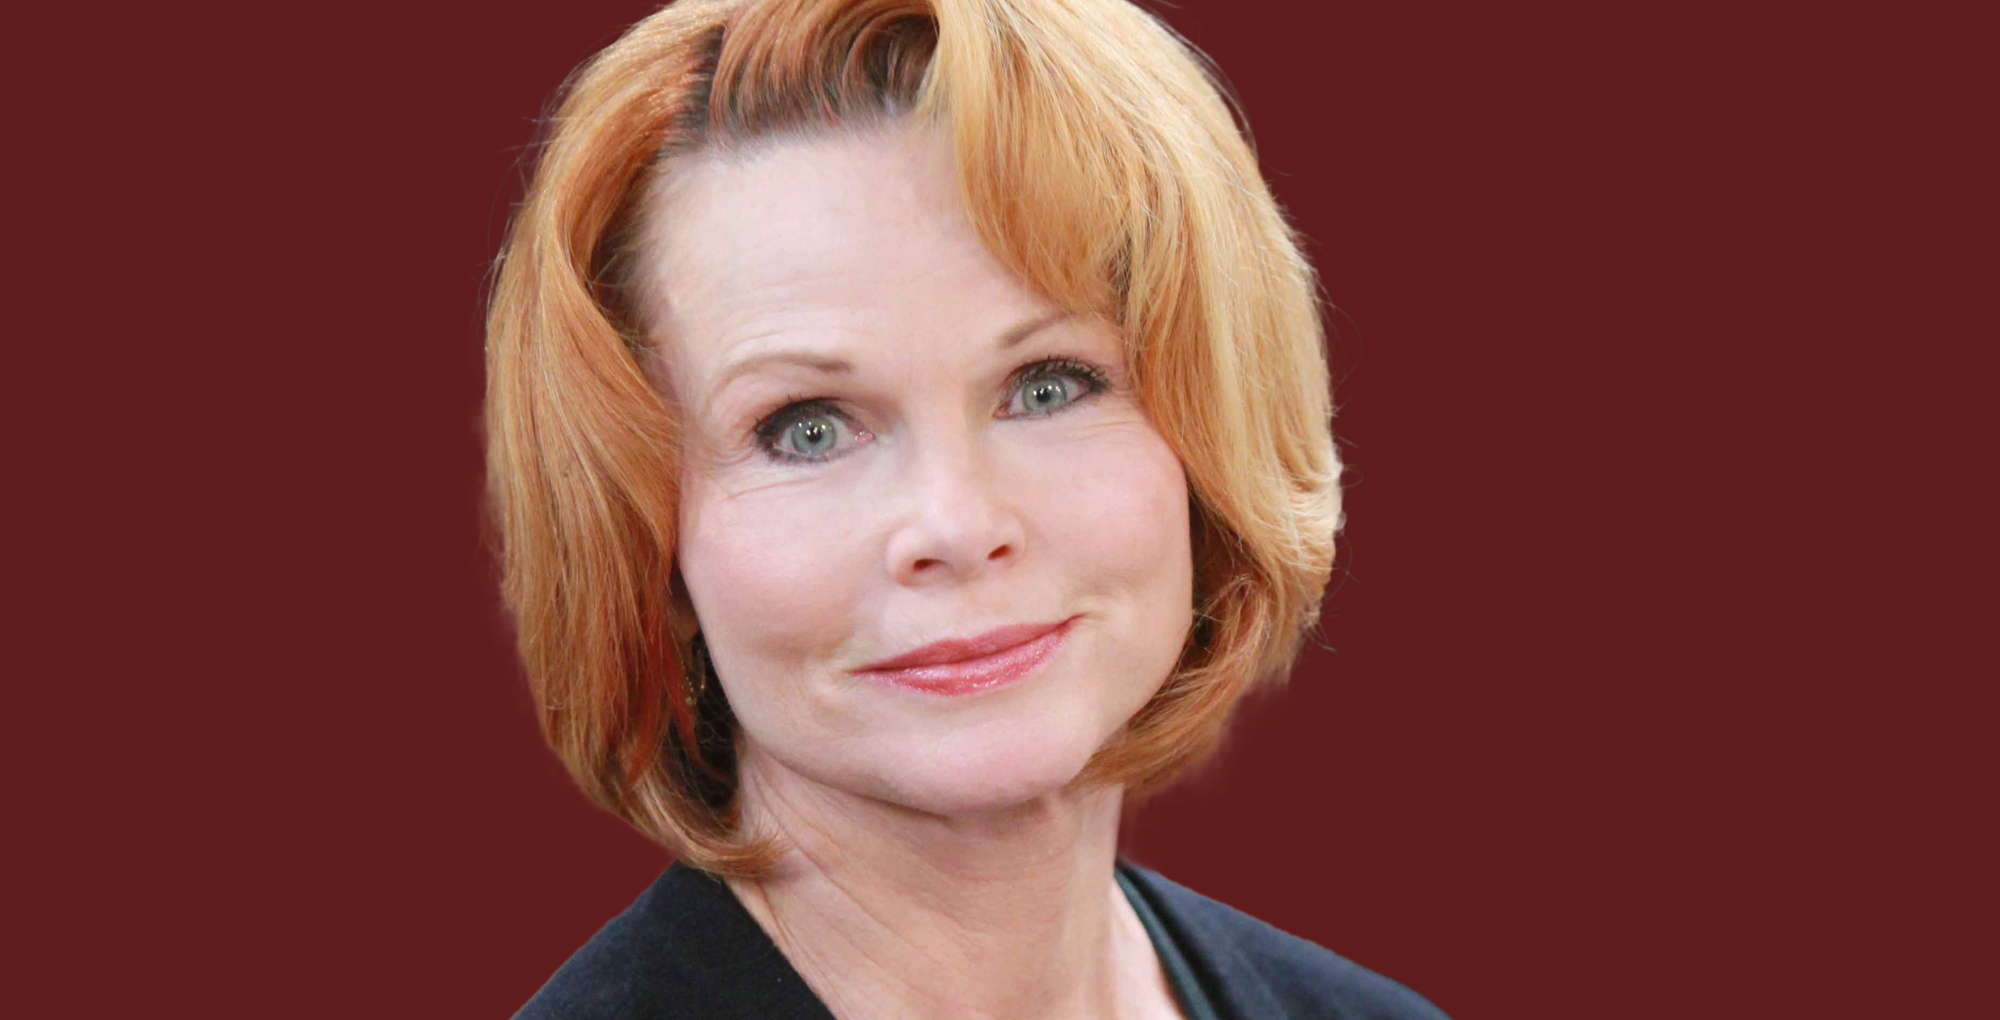 patsy pease played kimberly brady donovan on days of our lives.